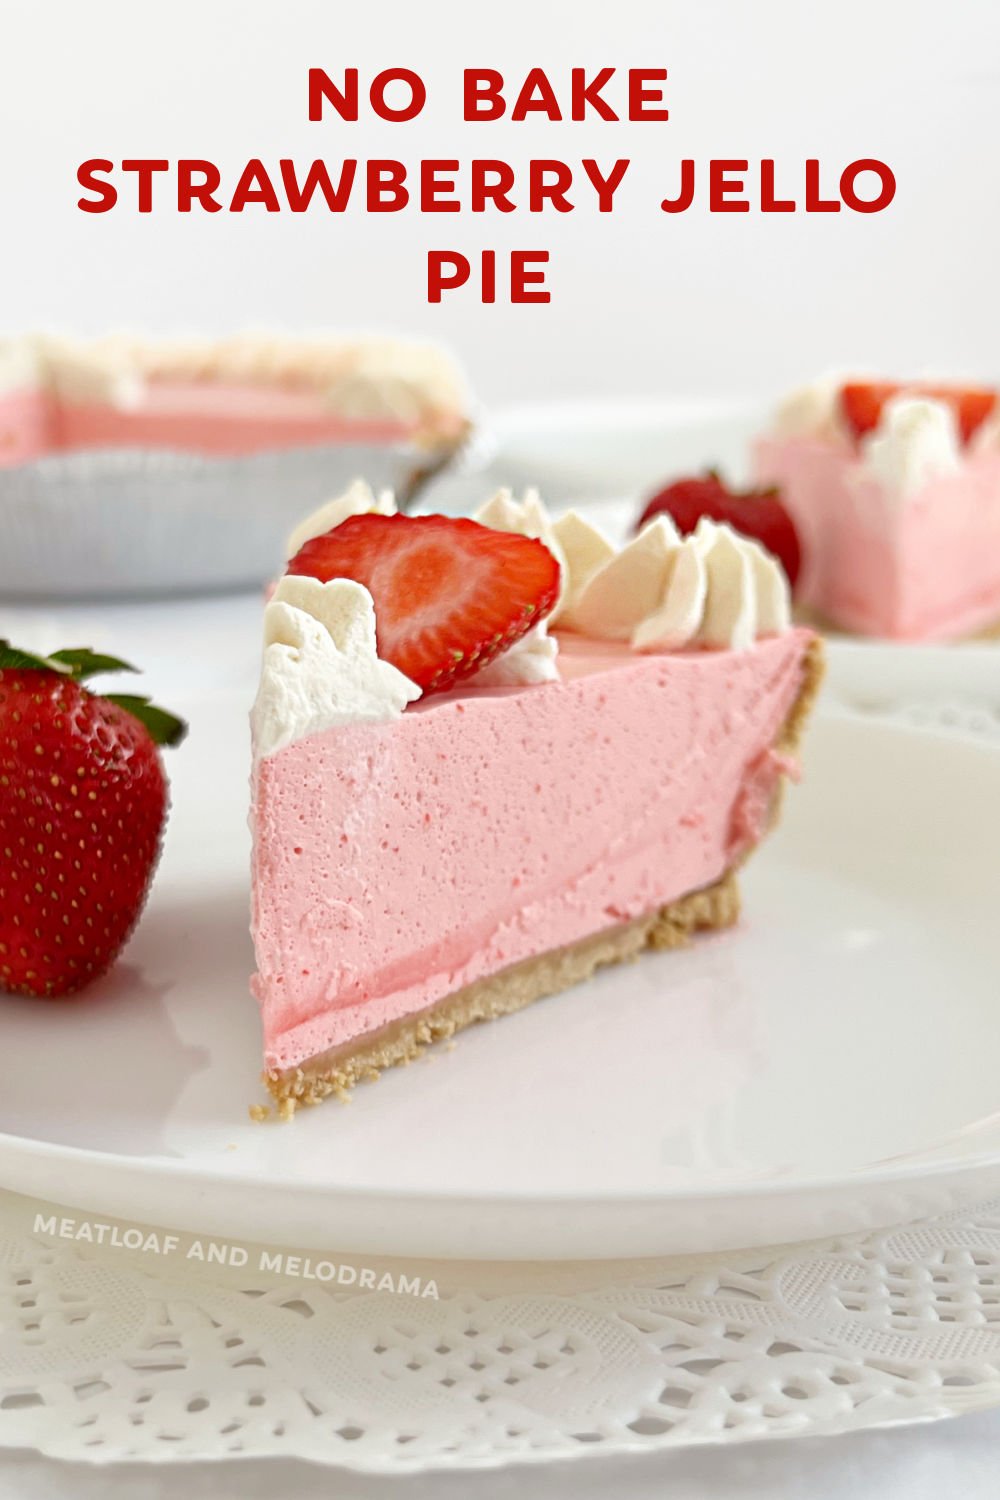 No Bake Strawberry Jello Pie with Cool Whip is an easy dessert made with strawberry Jello gelatin and whipped topping in a graham cracker crust. This easy recipe makes a delicious dessert for hot summer days or holiday dinners! via @meamel